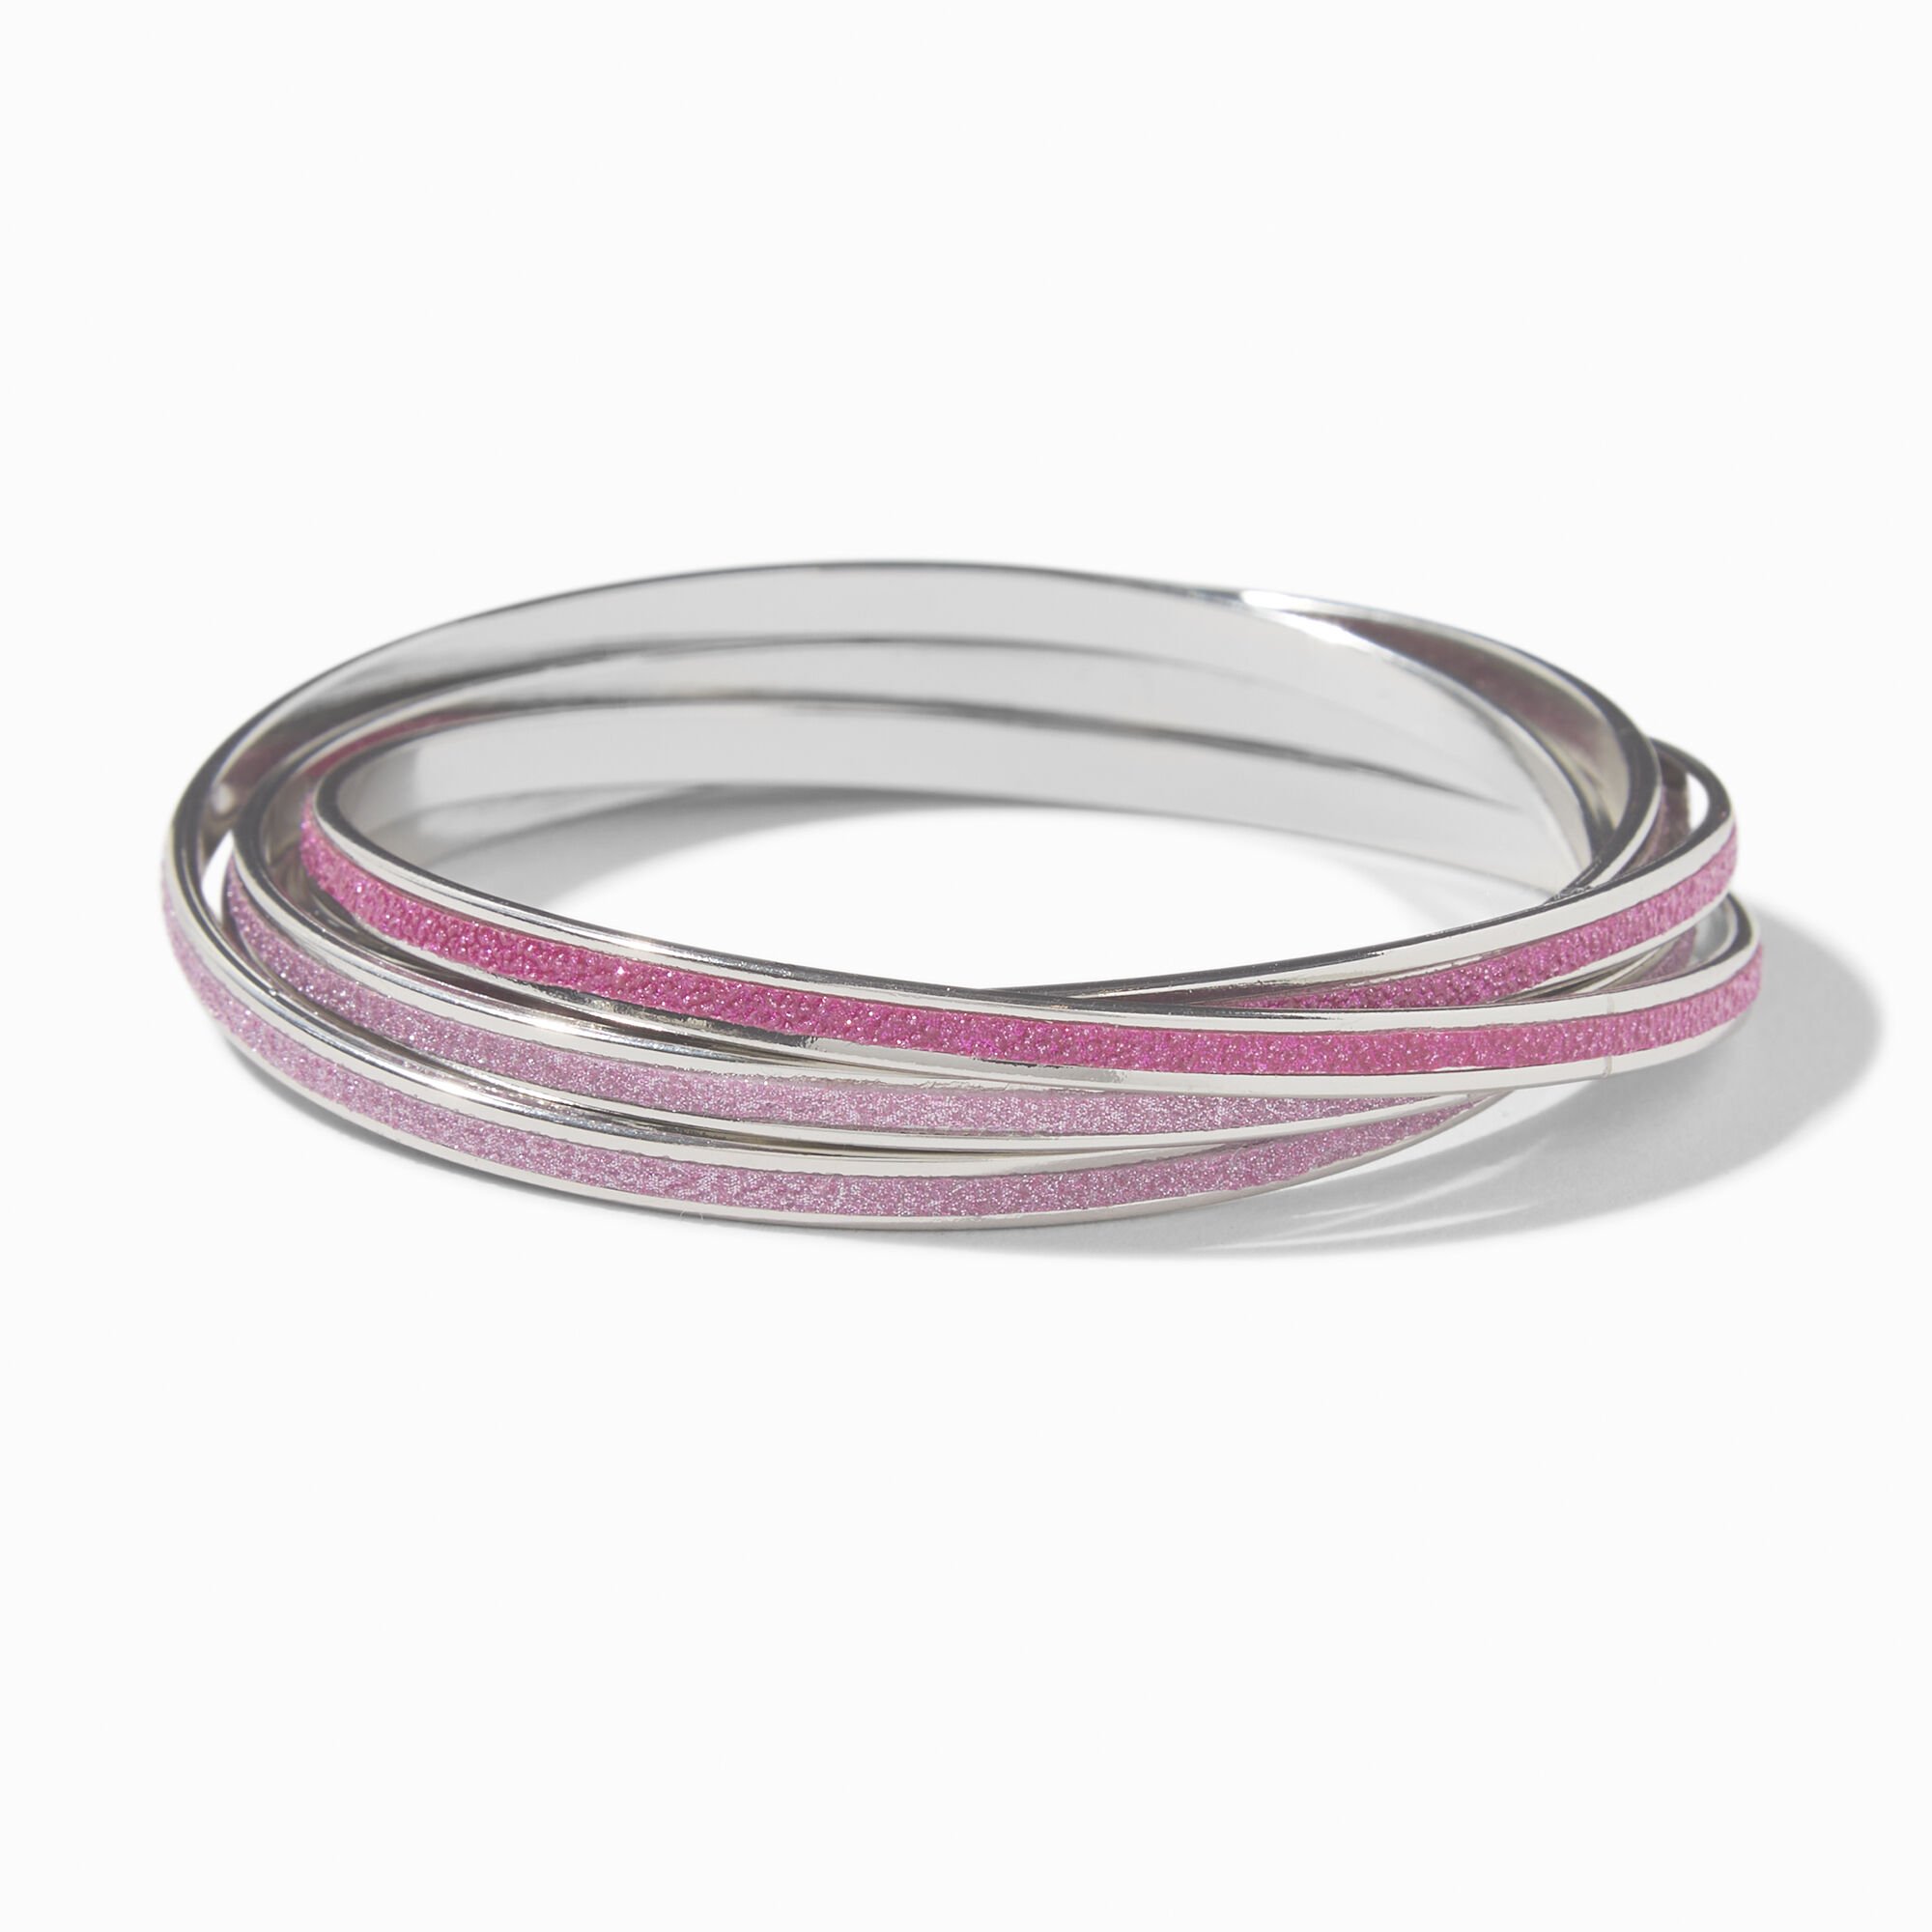 View Claires Glitter 5In1 Bangle Bracelet Pink information